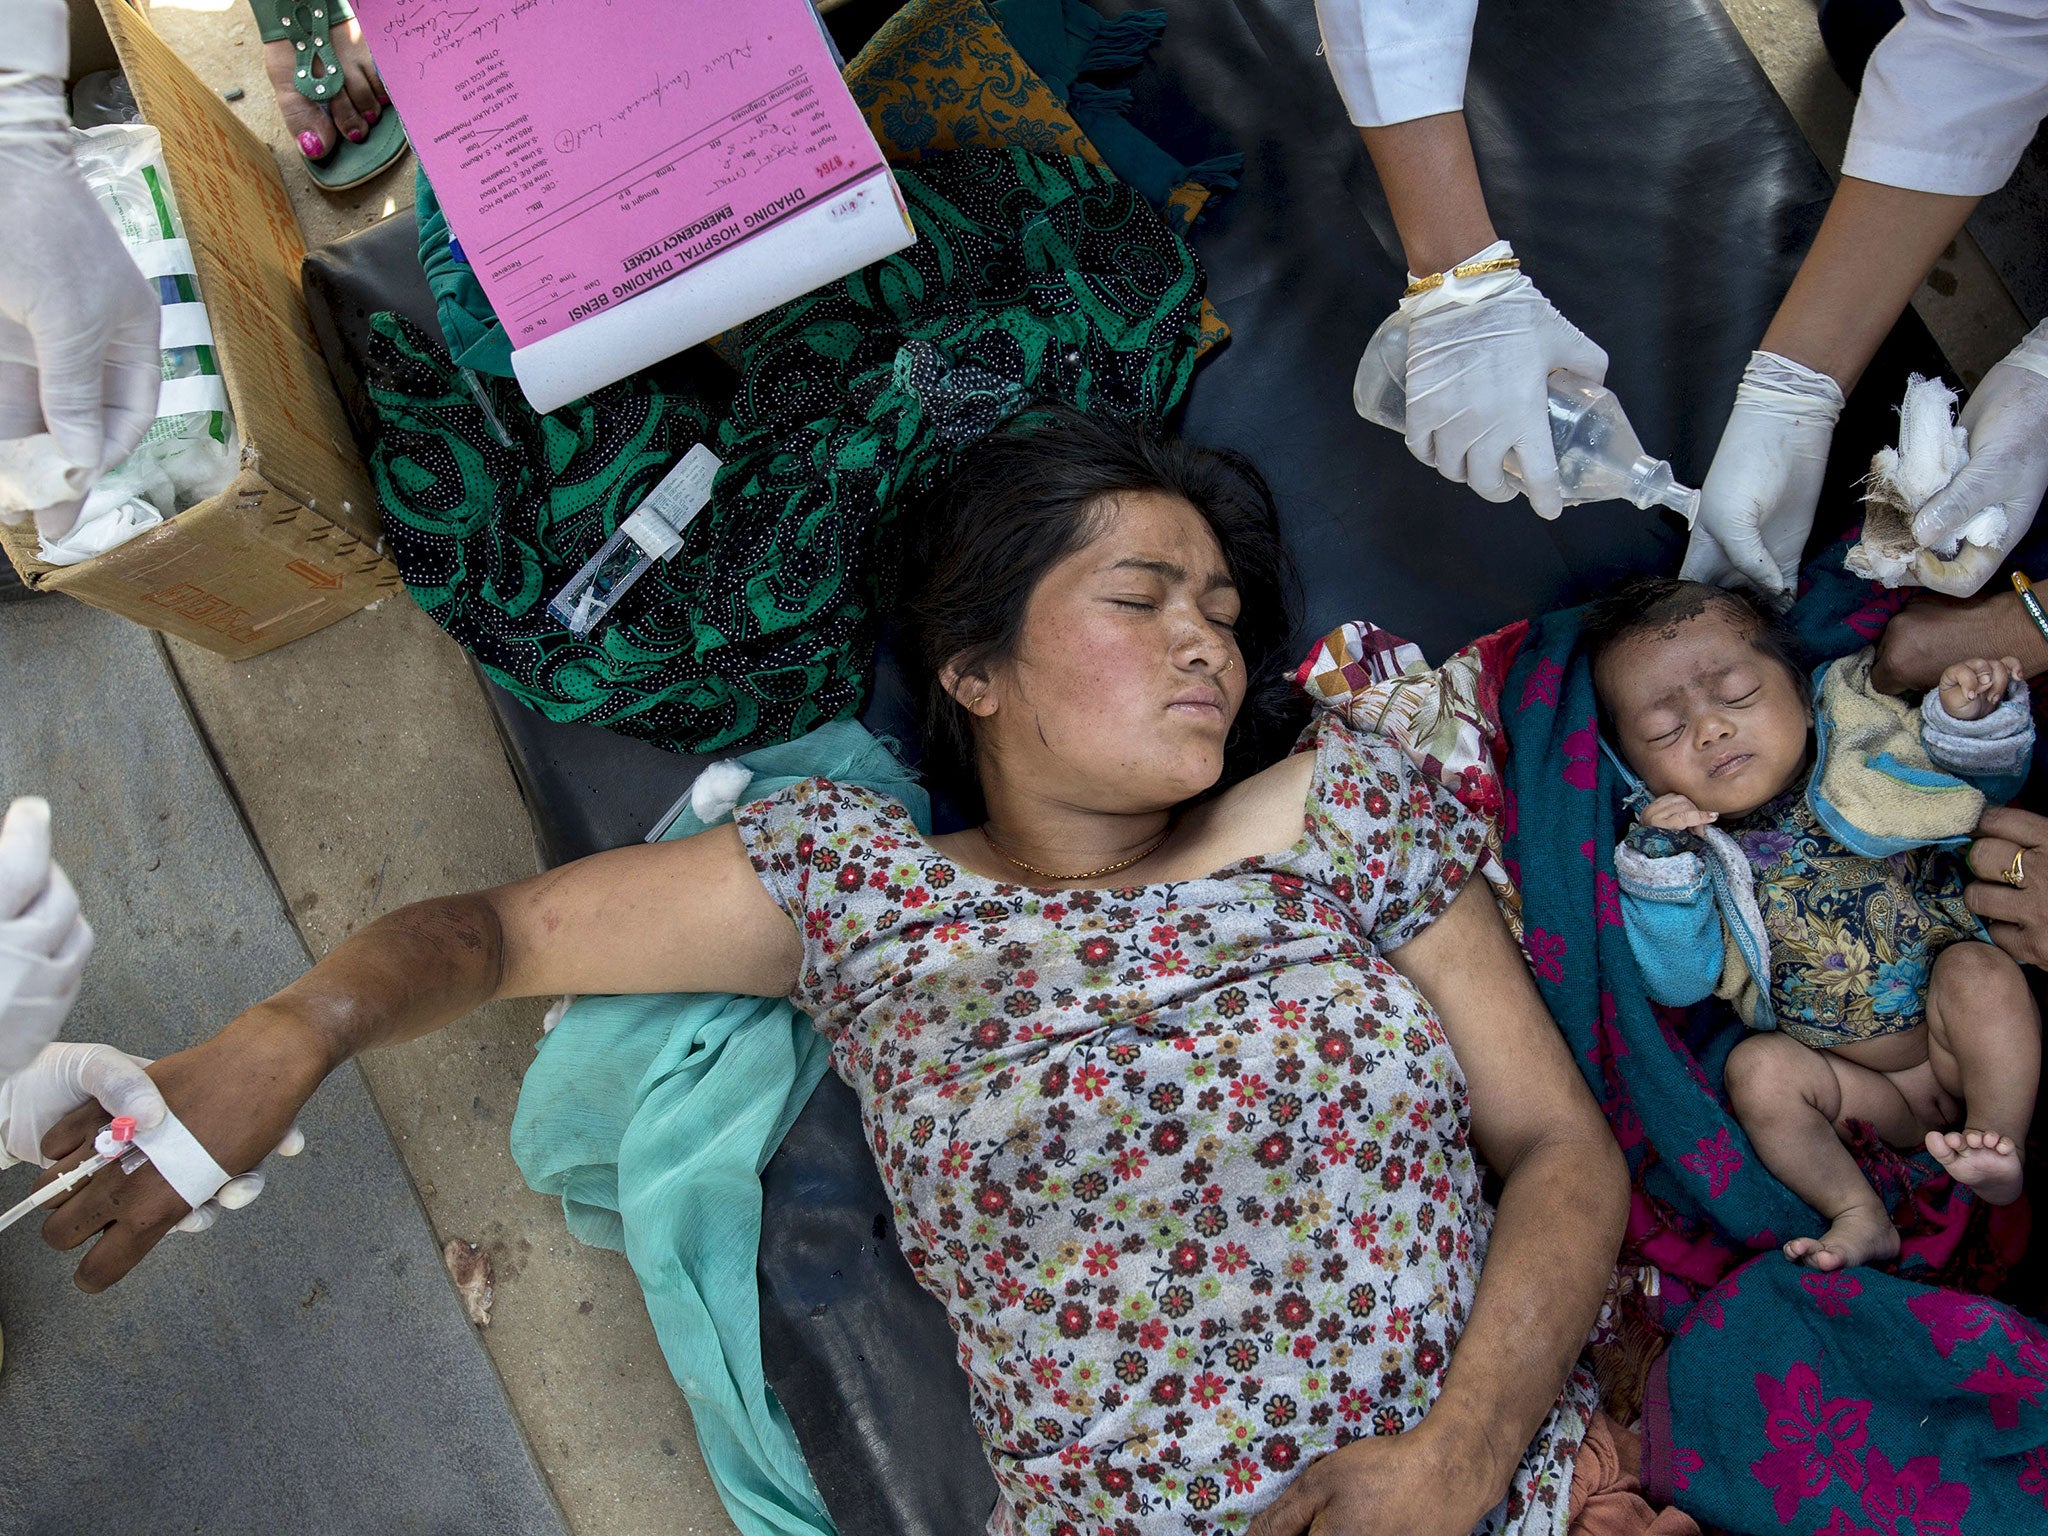 An injured woman and her daughter receive medical treatment after arriving at Dhading hospital, in the aftermath of the earthquake, in Dhading Besi